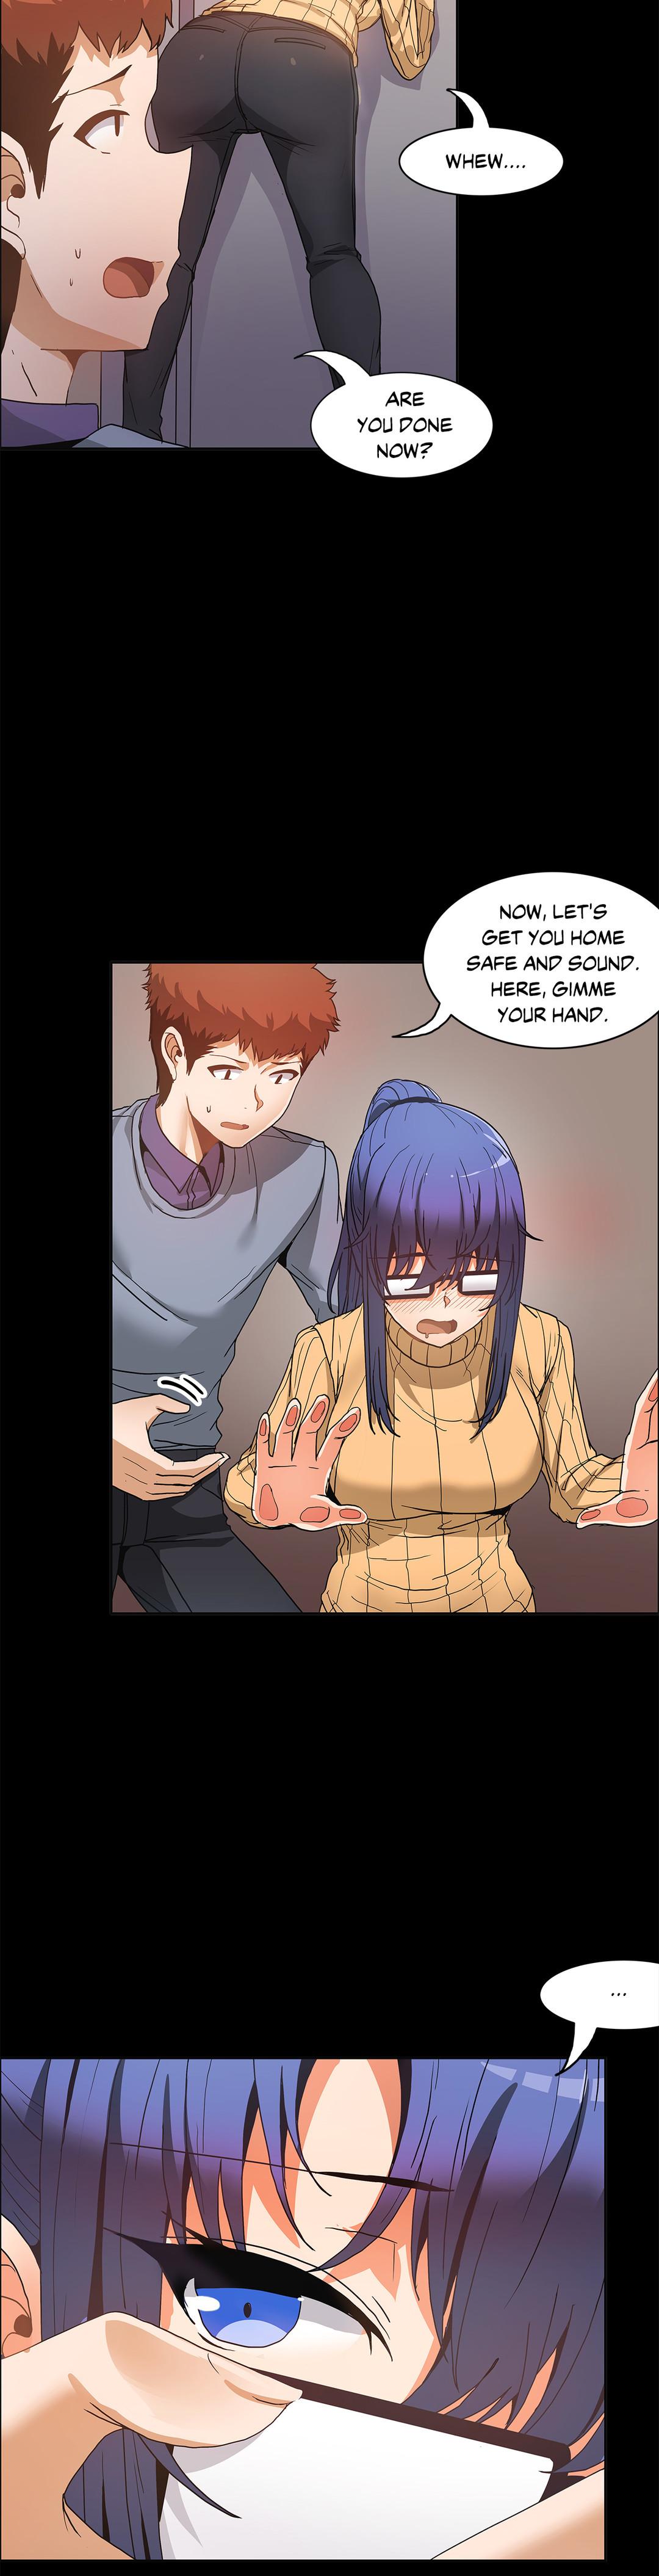 Cfnm The Girl That Wet the Wall Ch 48 - 50 Pure 18 - Page 9